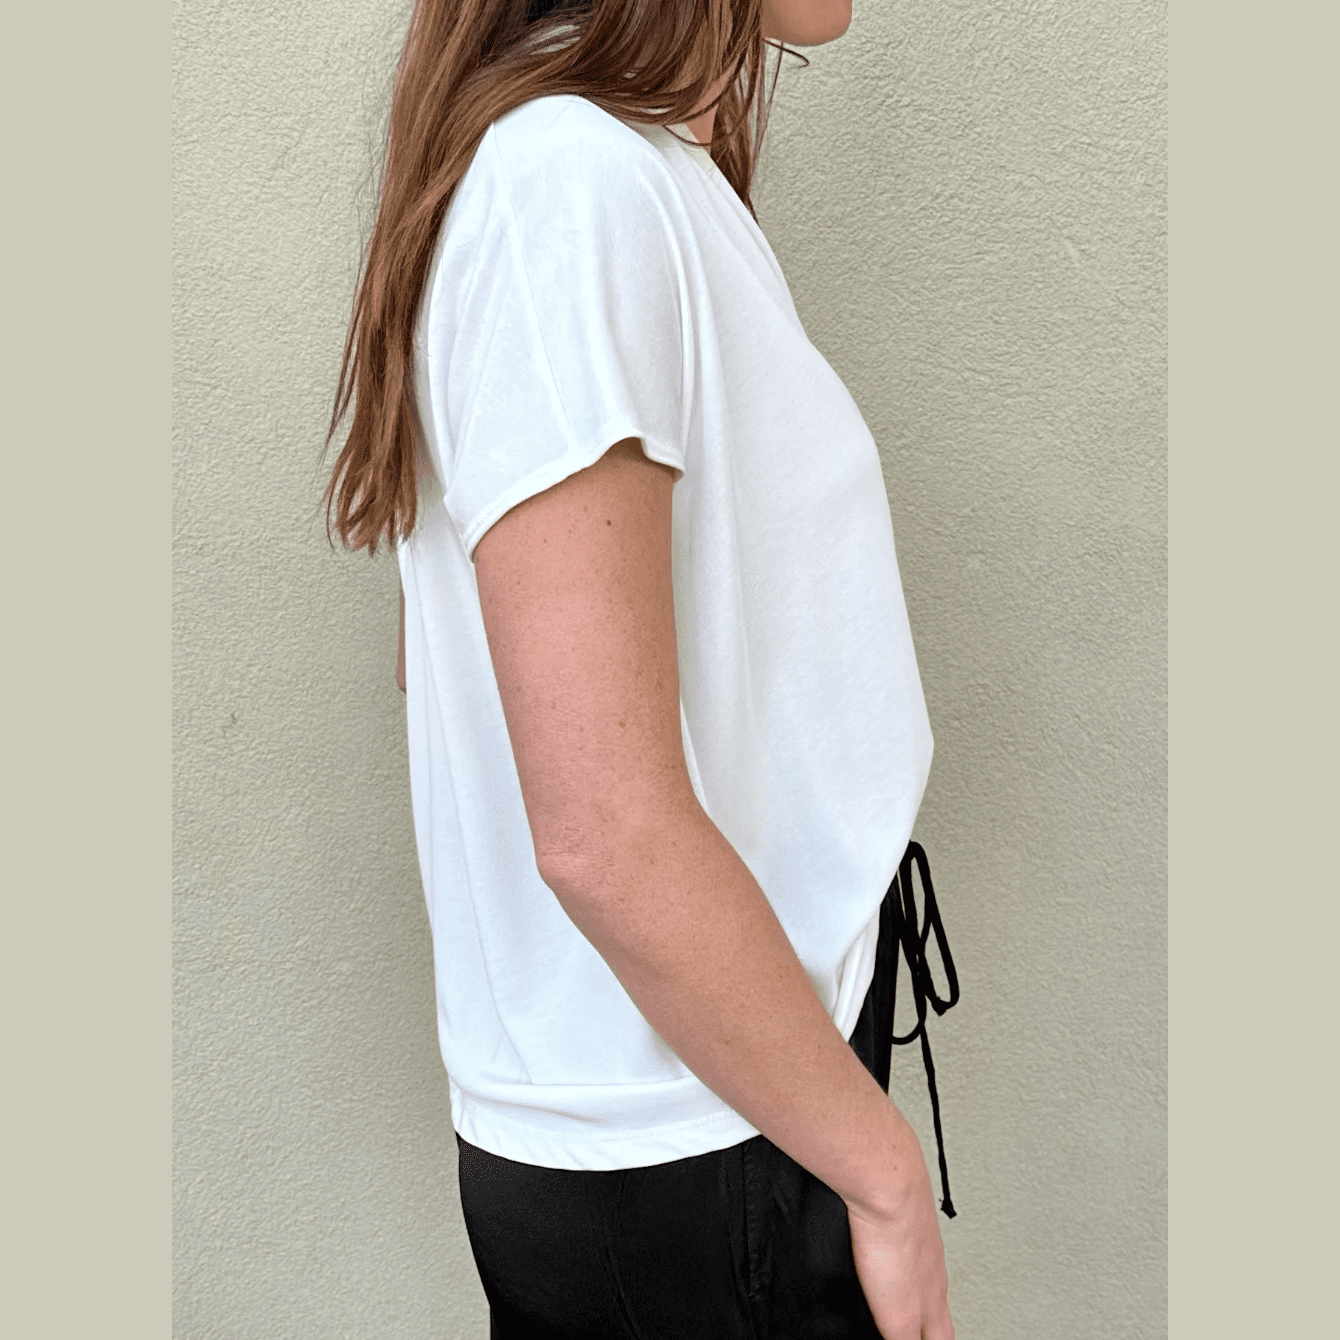 Veronica M V-Neck Cupro Top in Ivory and Storm - Jaunts Boutique 